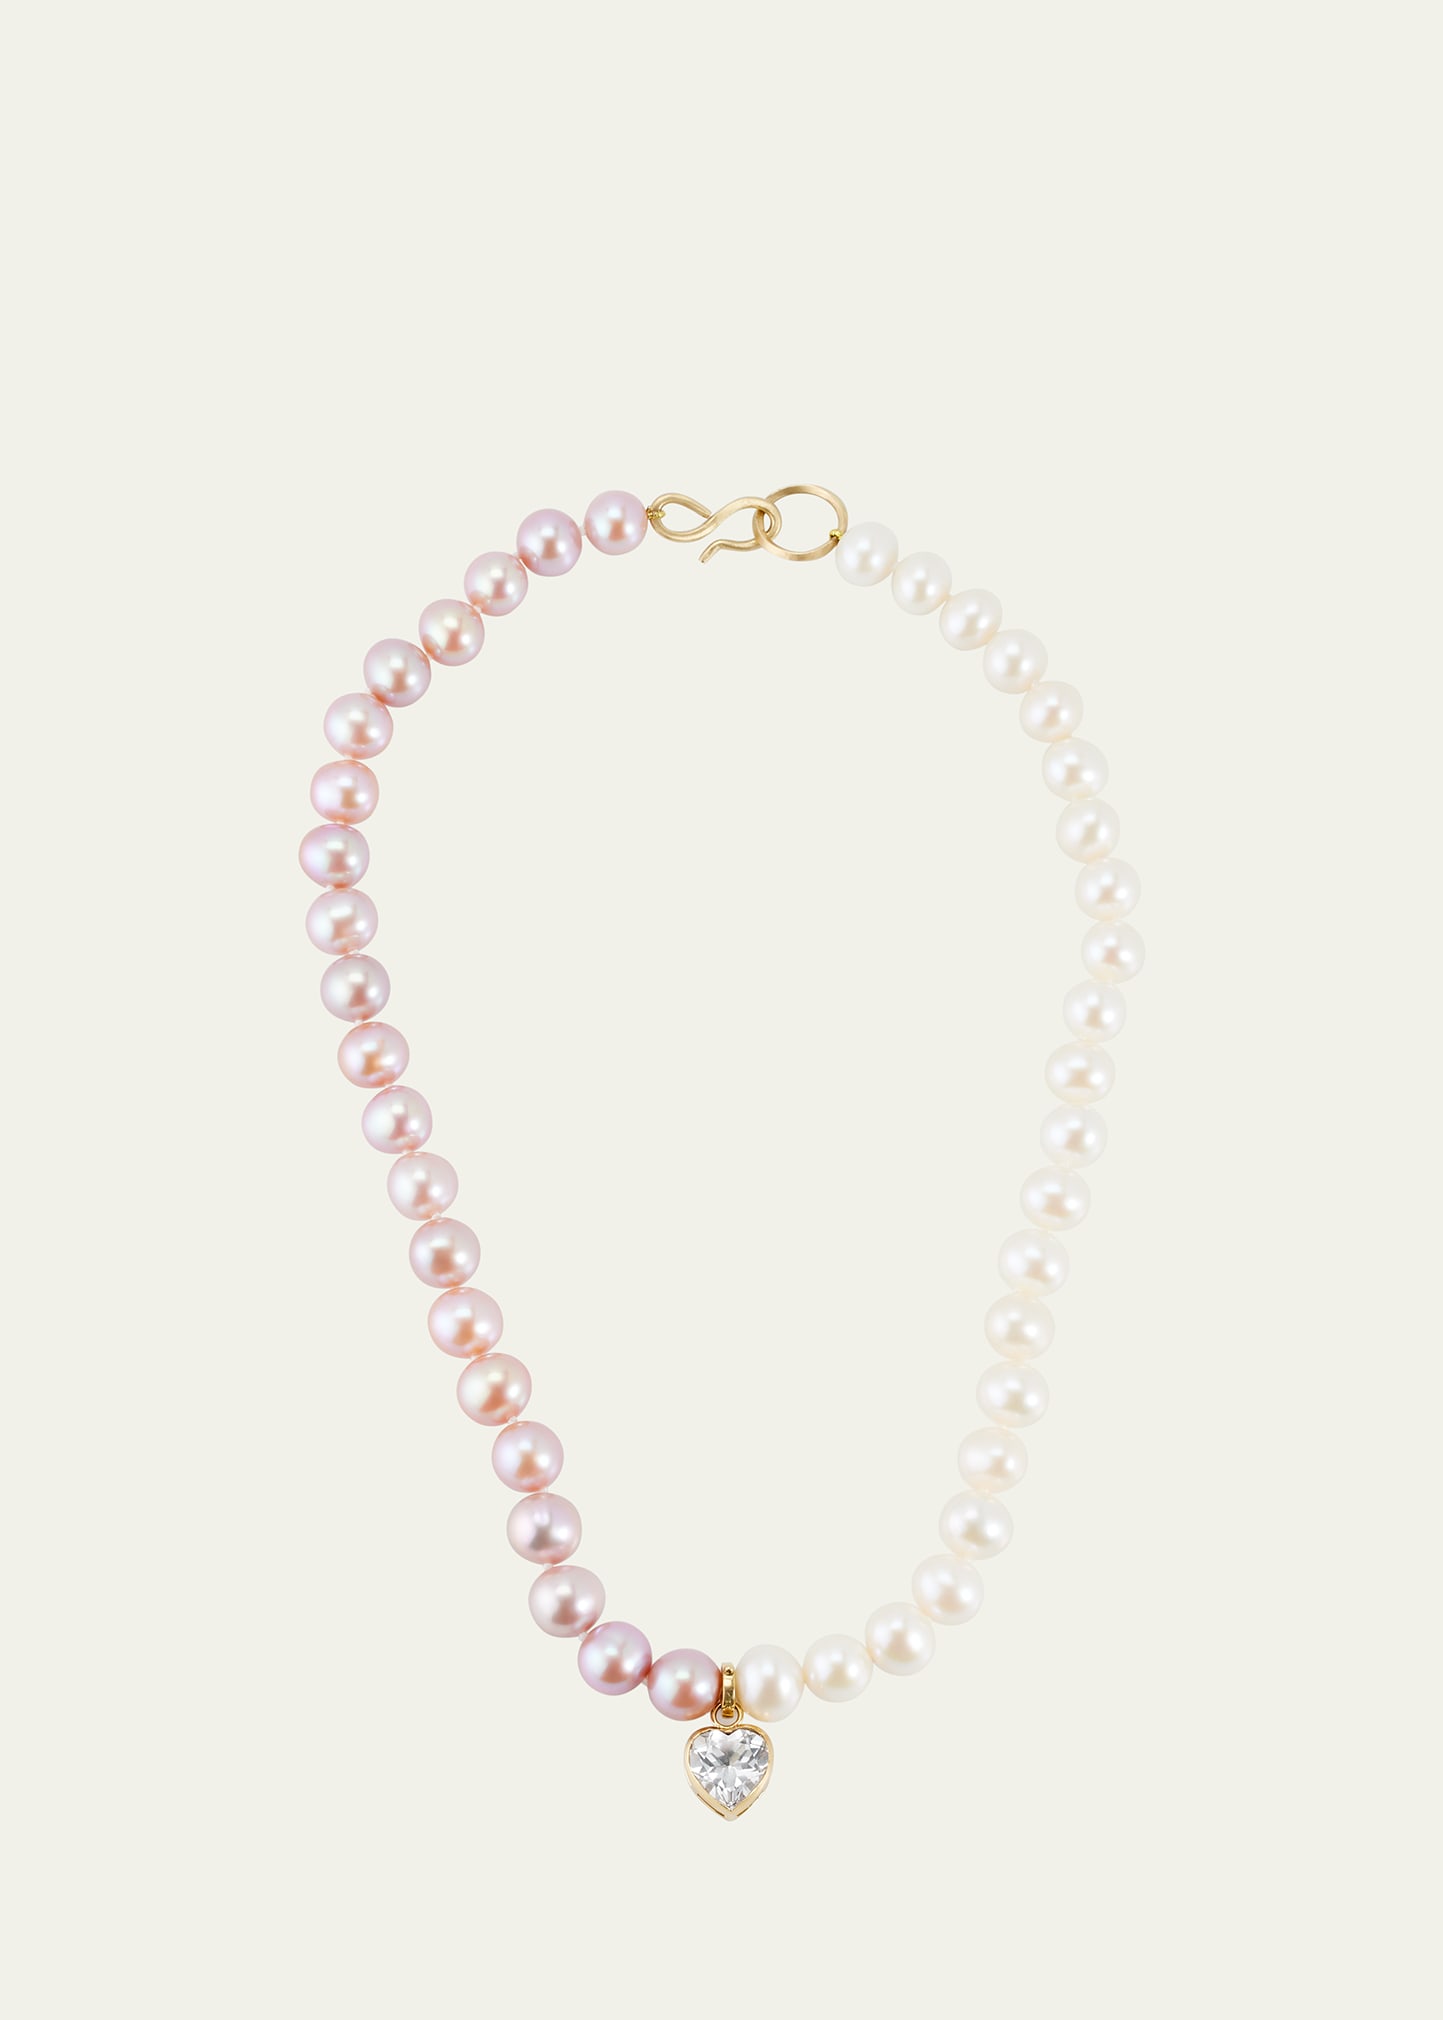 White and Pink Freshwater Pearl Necklace with Detachable Heart Pendant